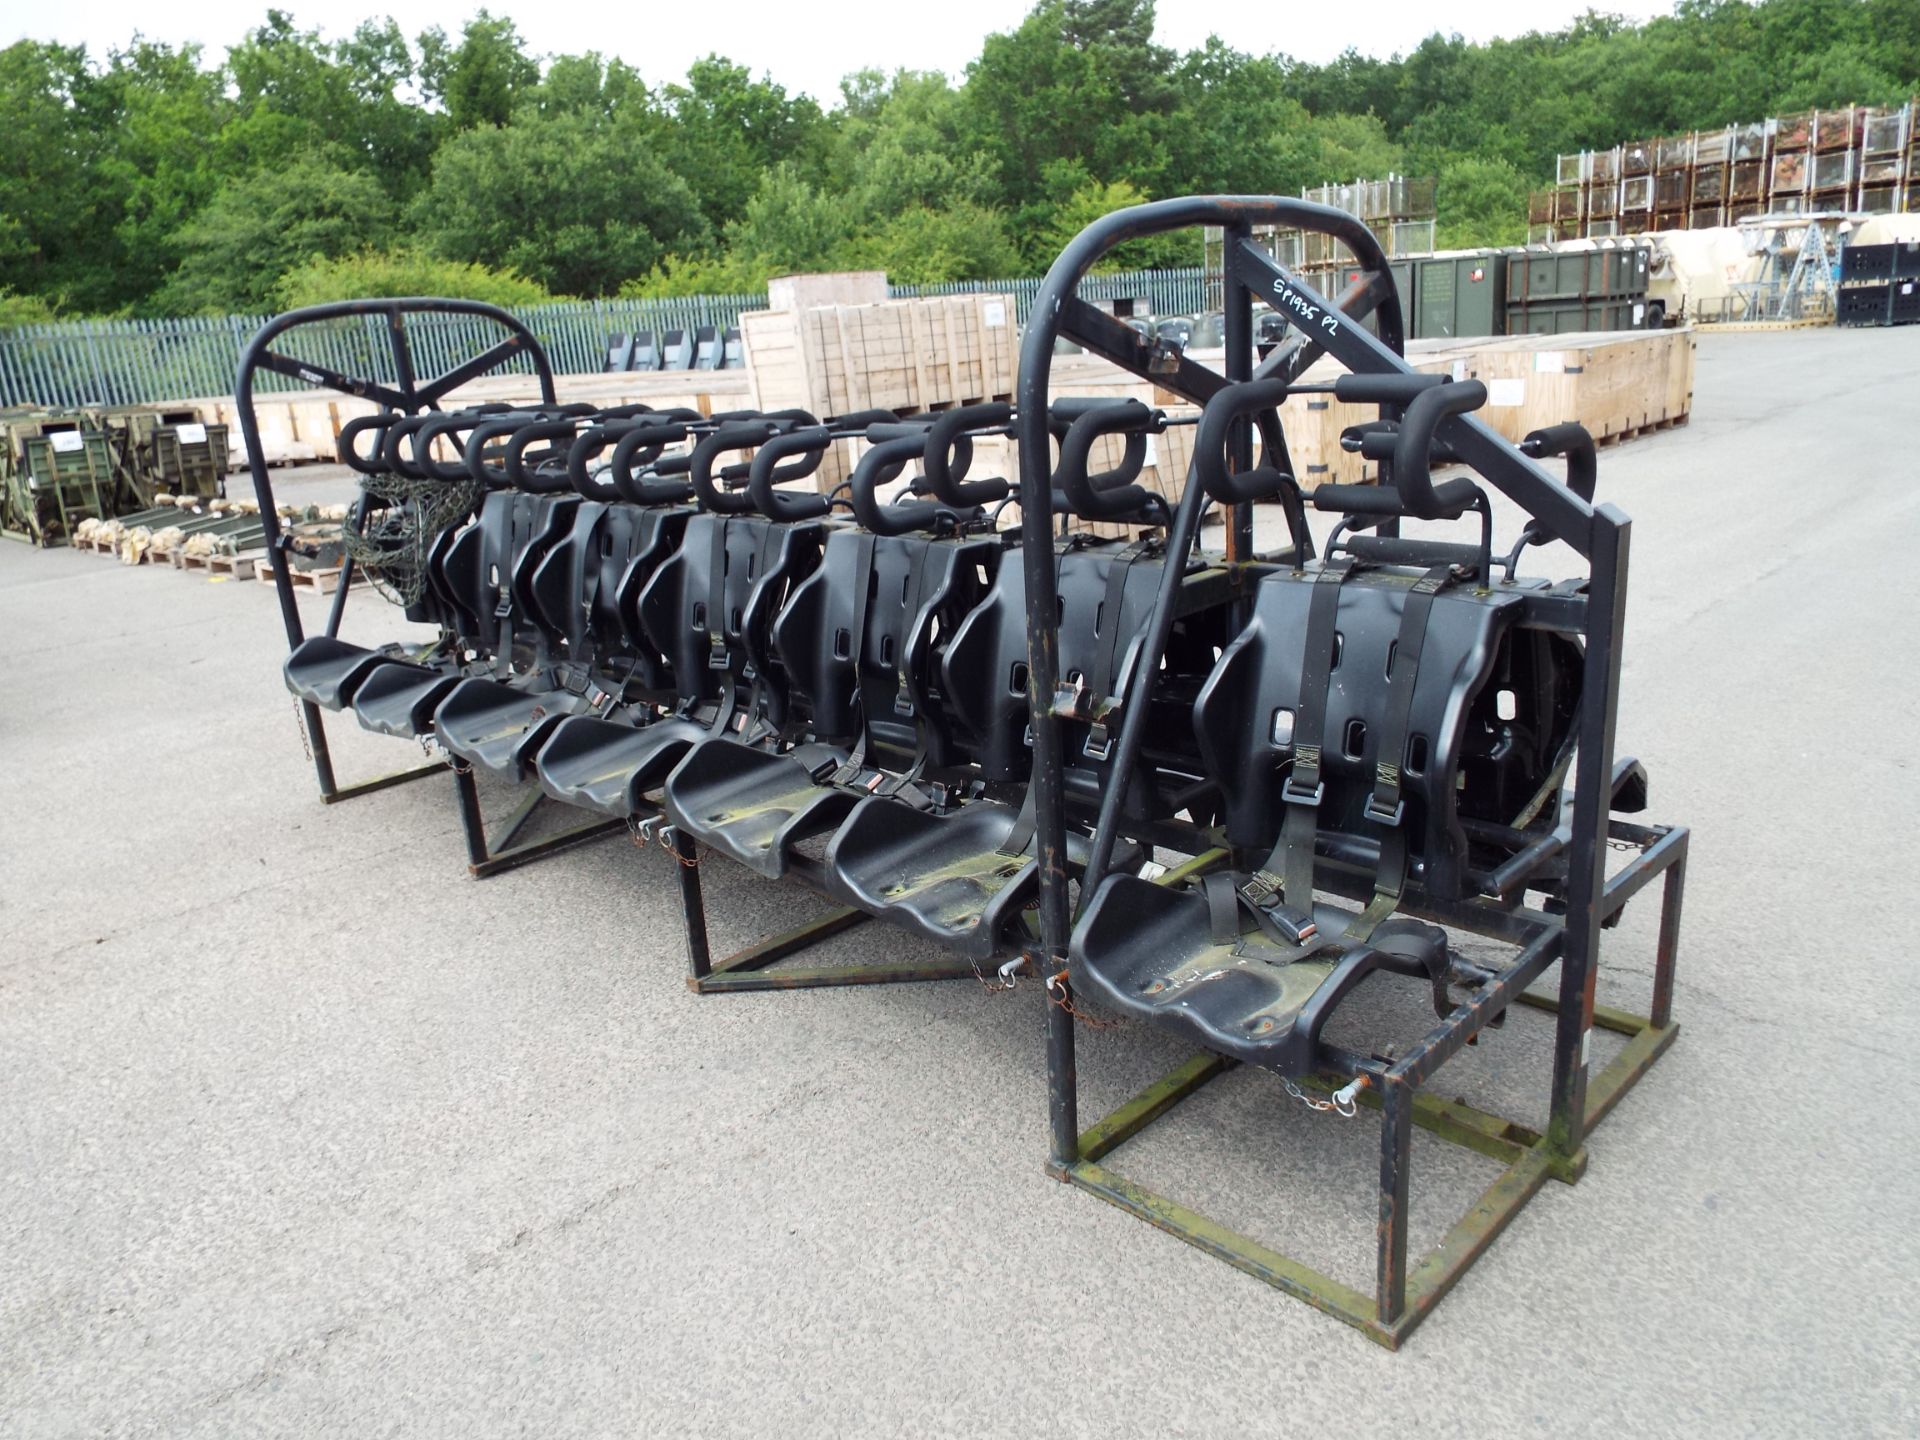 14 Man Security Seat suitable for Leyland Dafs, Bedfords etc